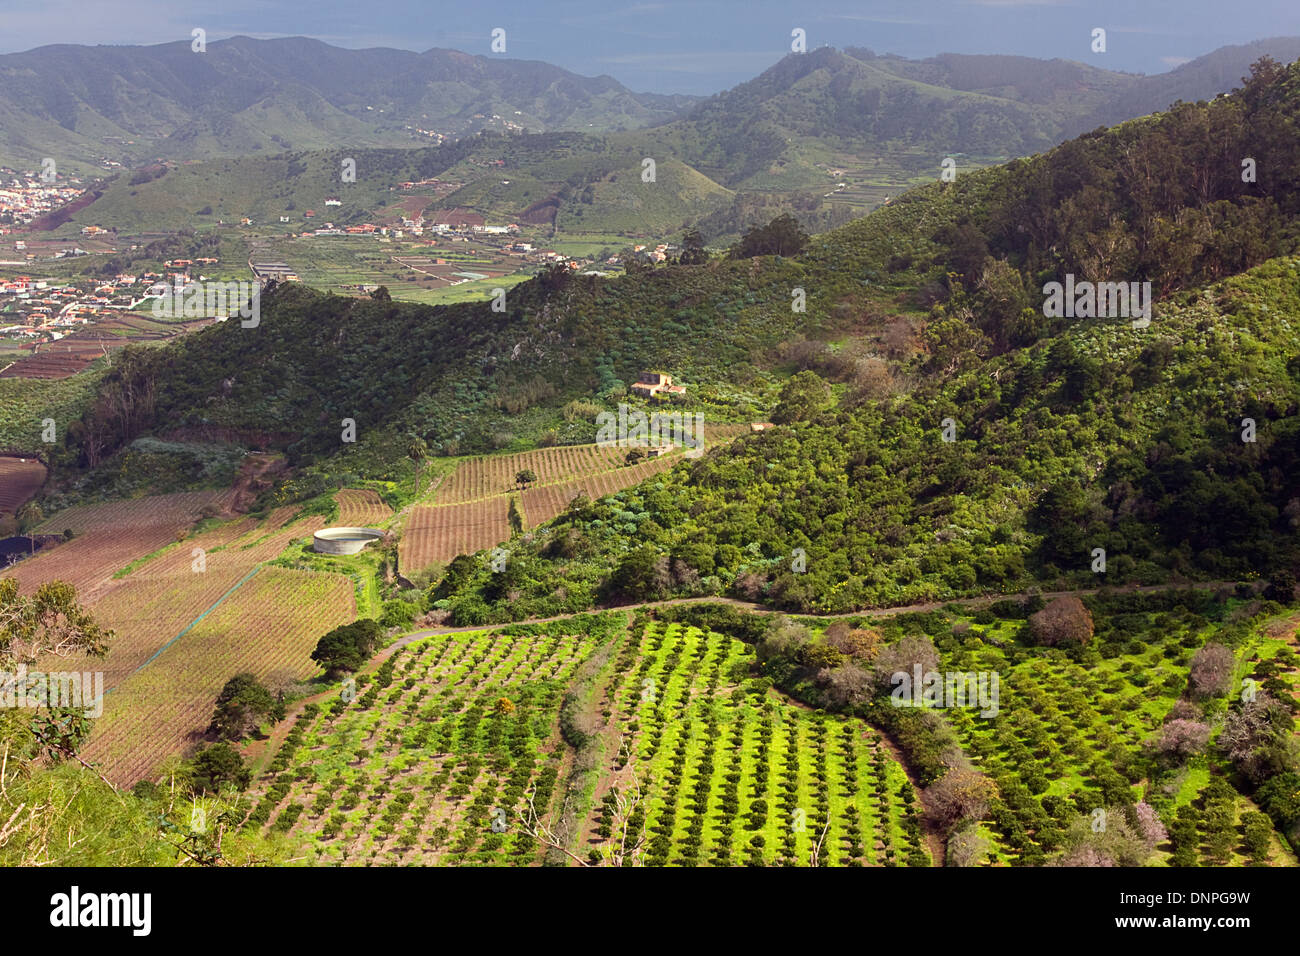 agricultural landscape, Valle Guerra, northern Tenerife, Spain Stock Photo